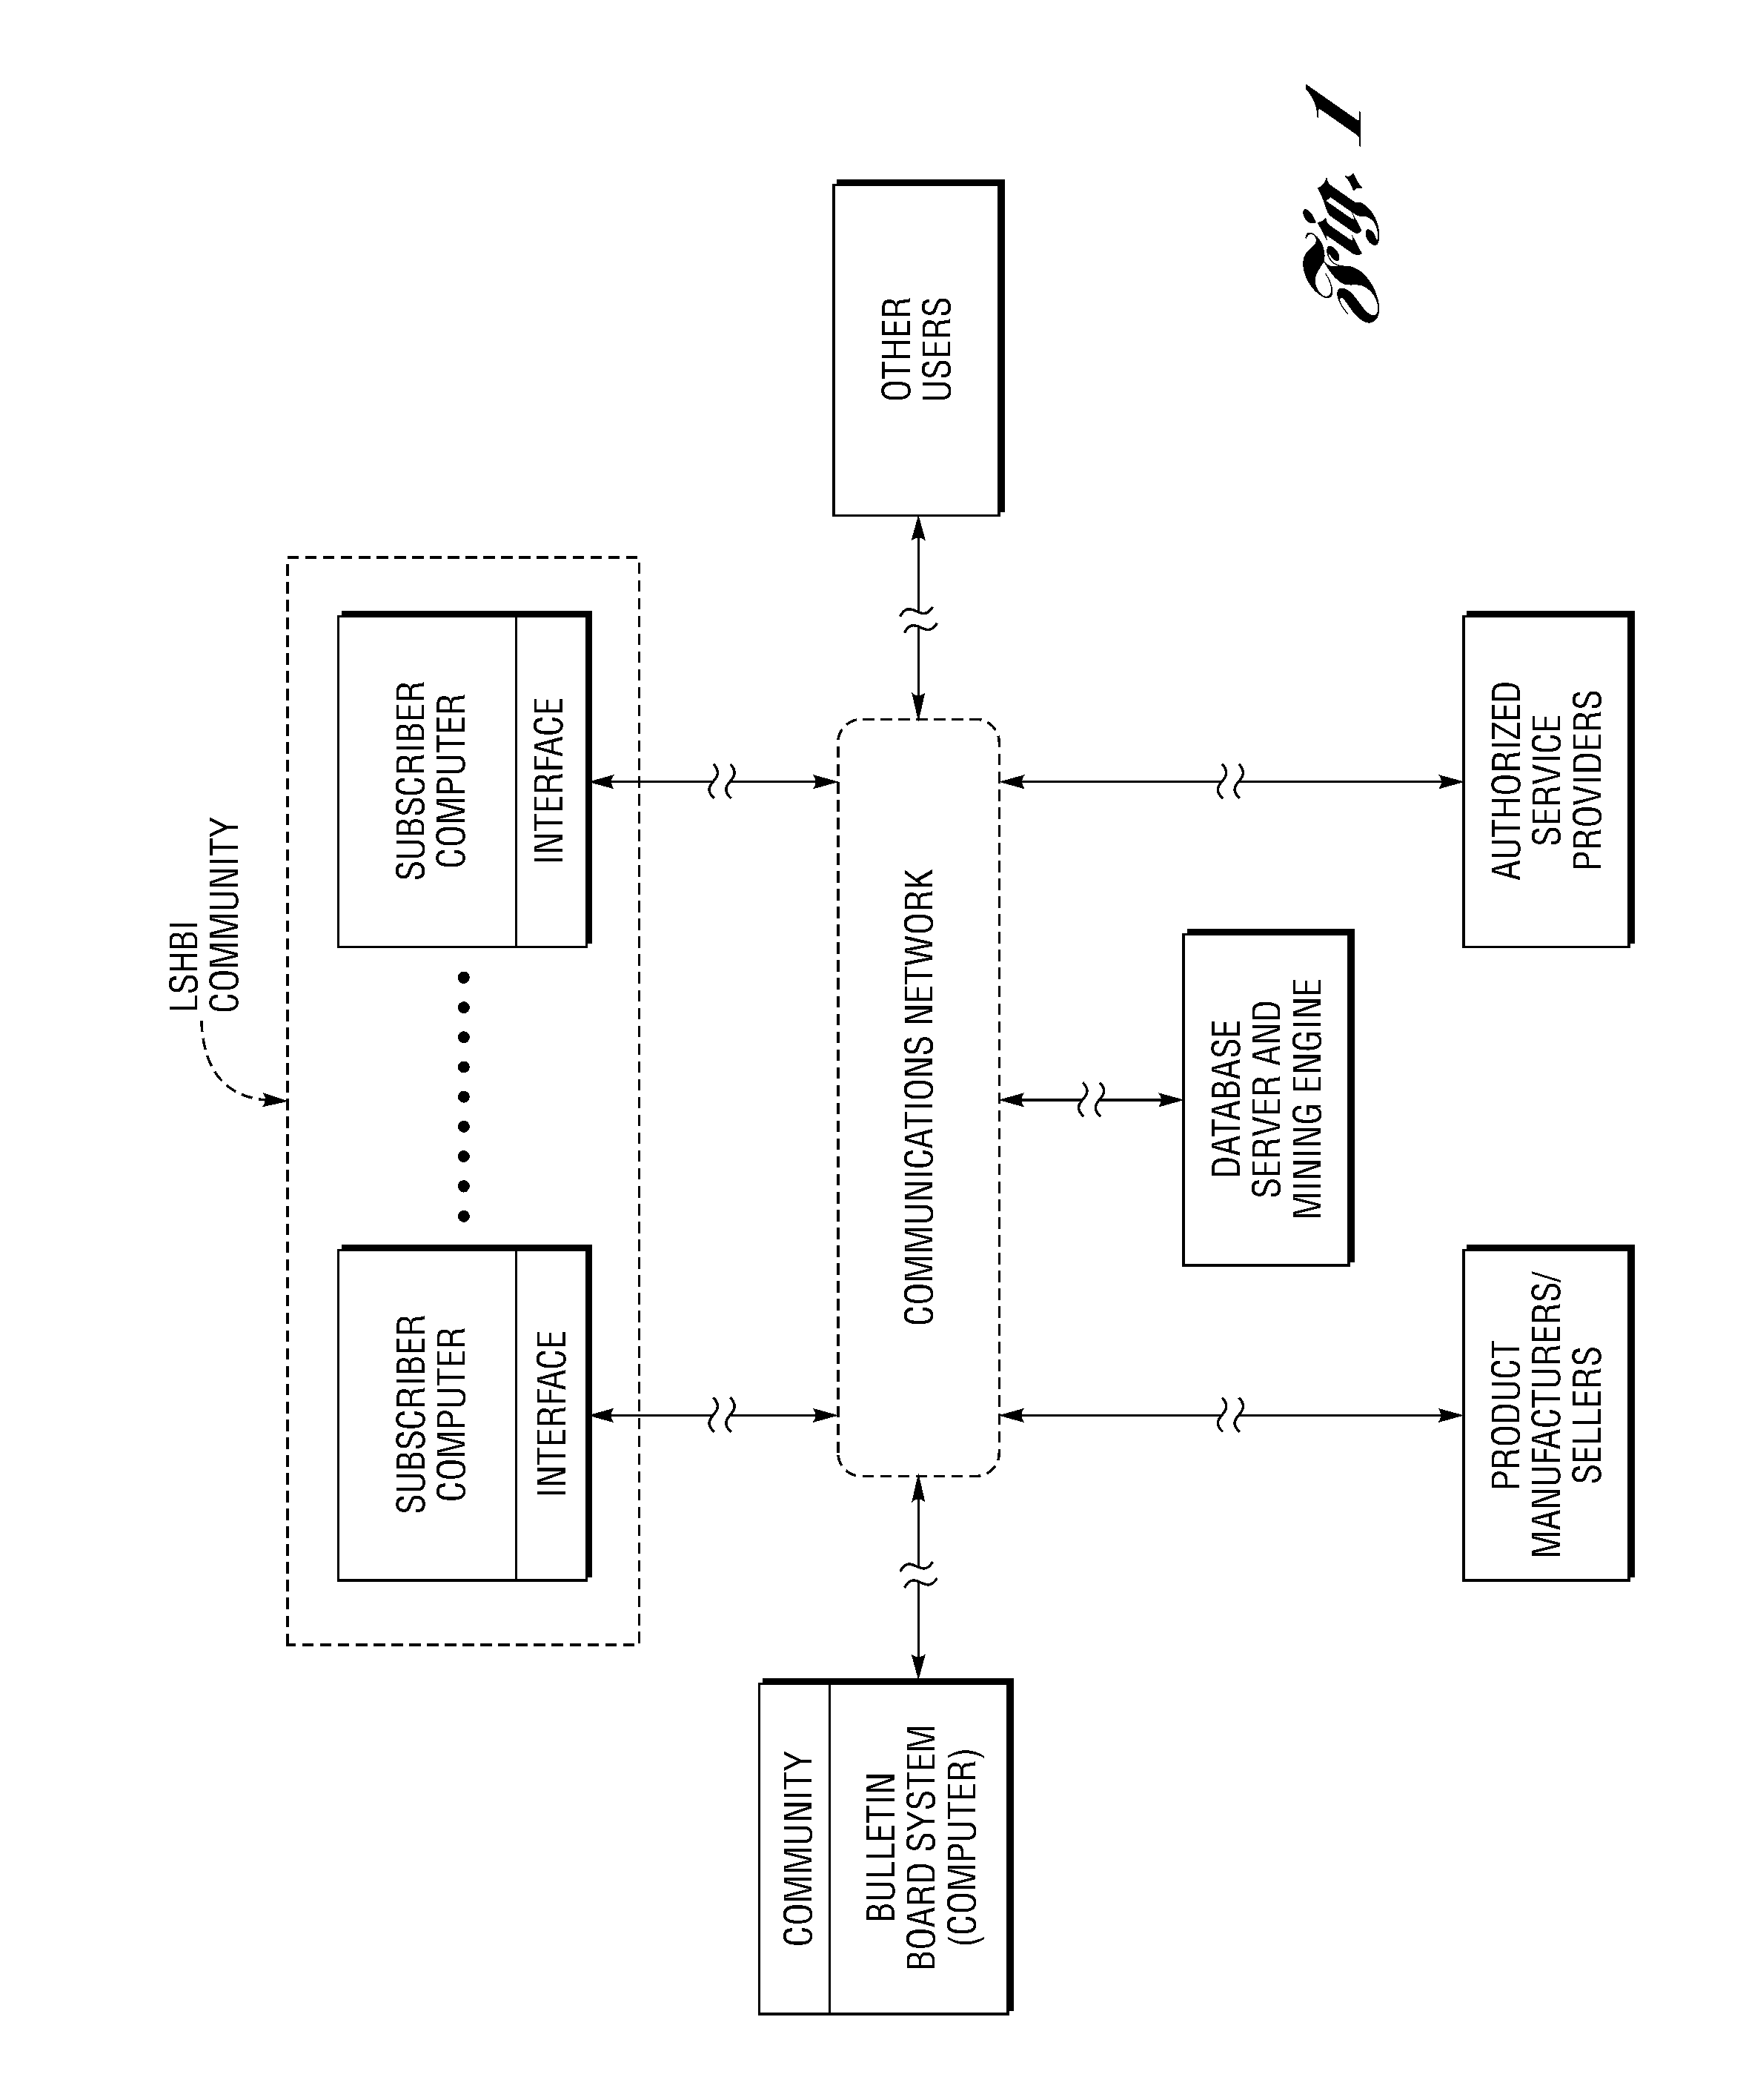 Scalable method and system for connecting, tracking and facilitating warranty, maintenance, service and replacement of products within a community of residential housing and/or commercial building inventories or units over a communications network